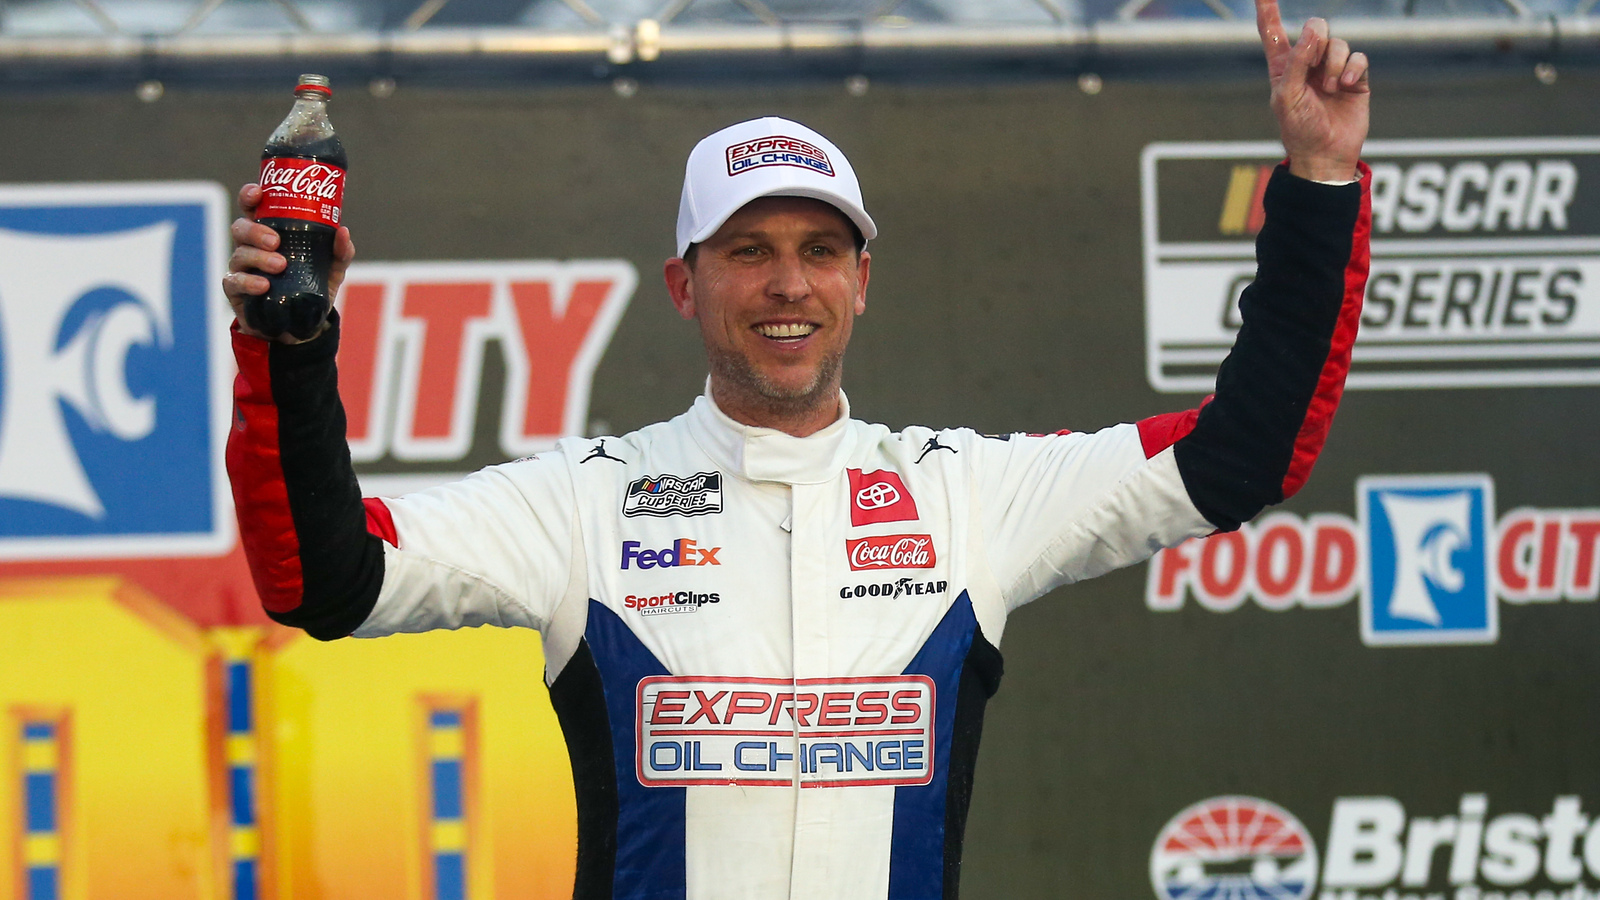 Kyle Petty declares Denny Hamlin will be one of the greatest NASCAR drivers ever